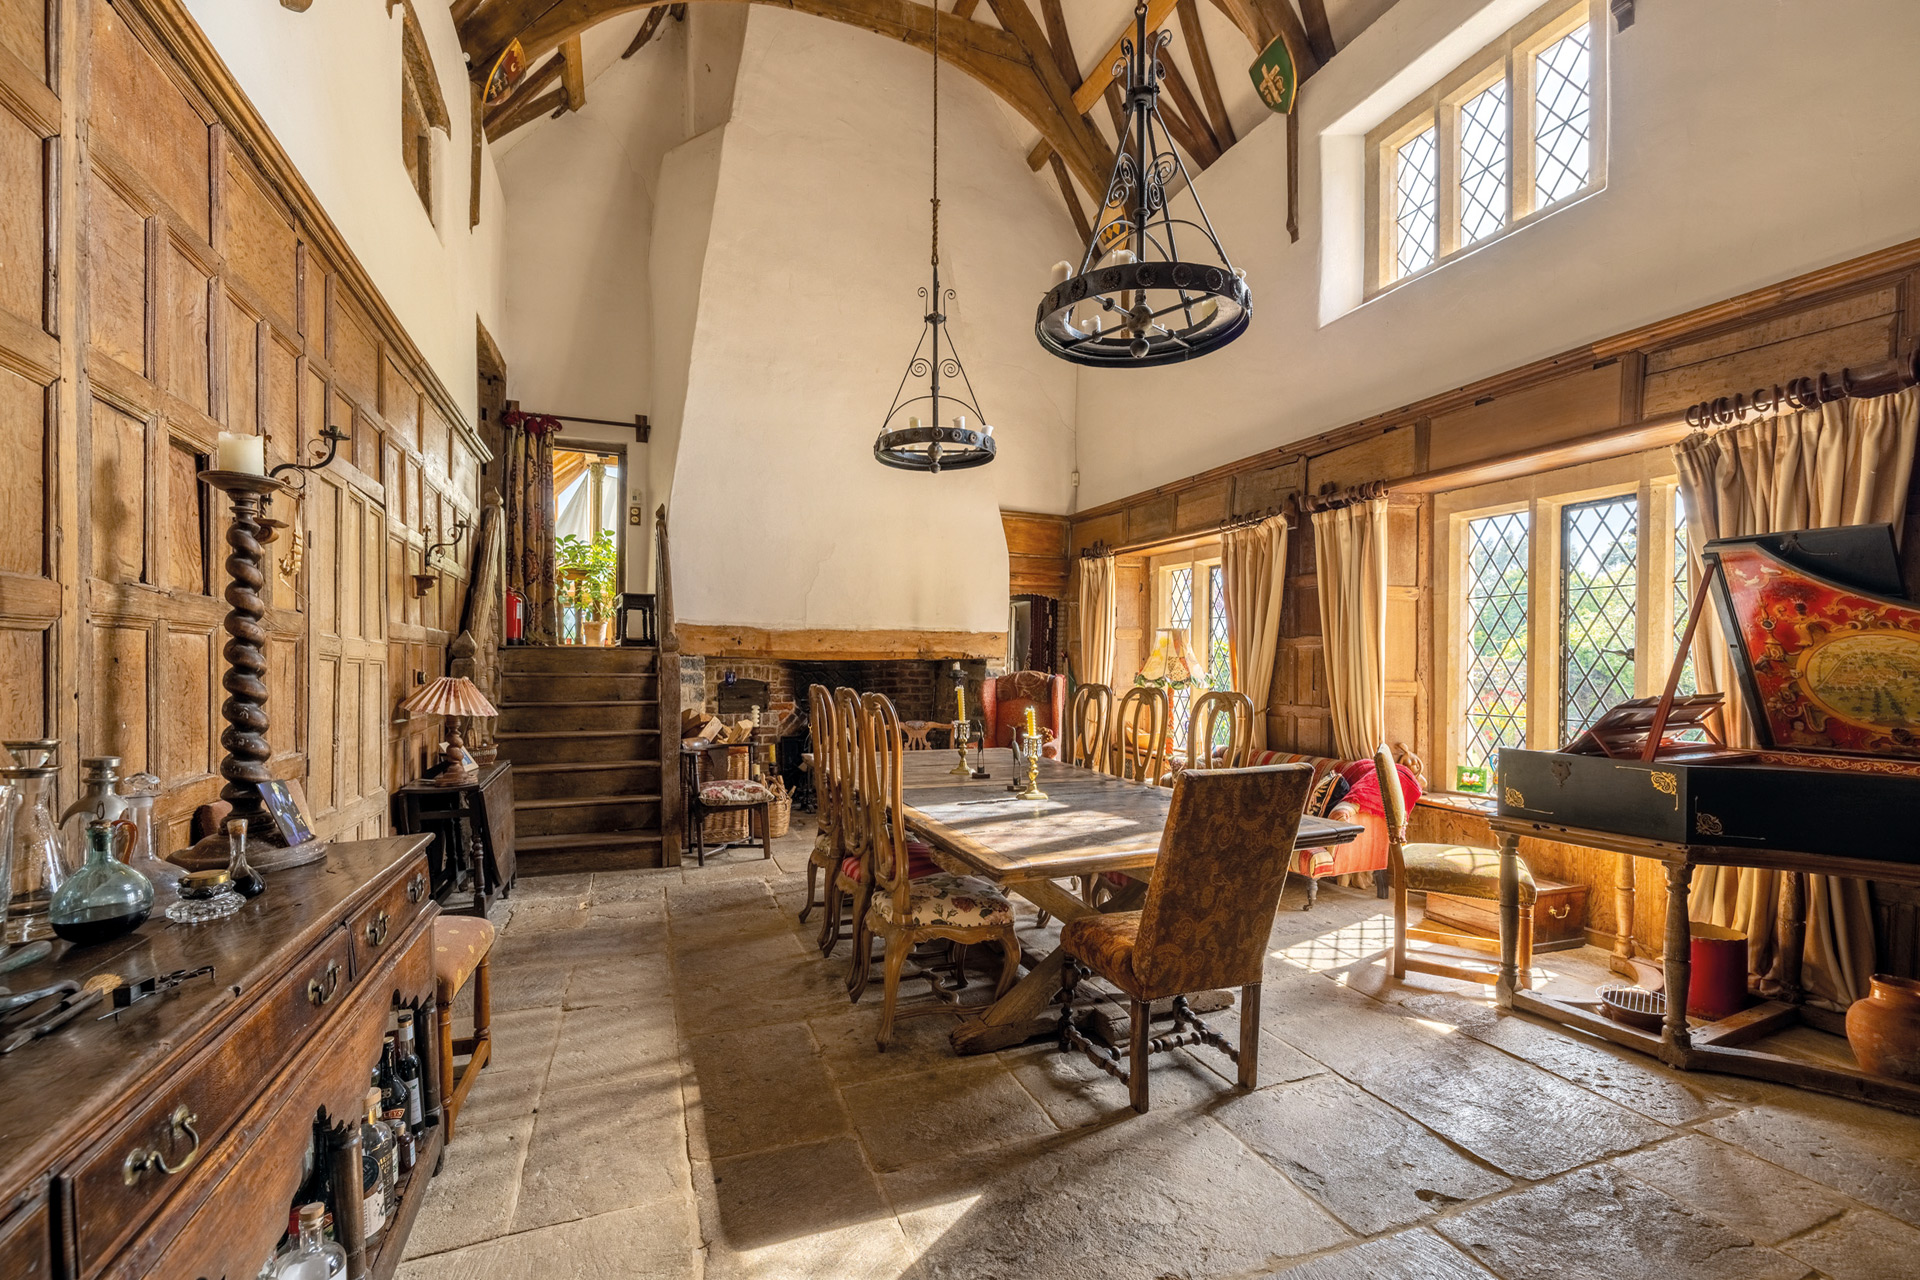 Tudor-style dining room with flagstone floors and vaulted ceiling